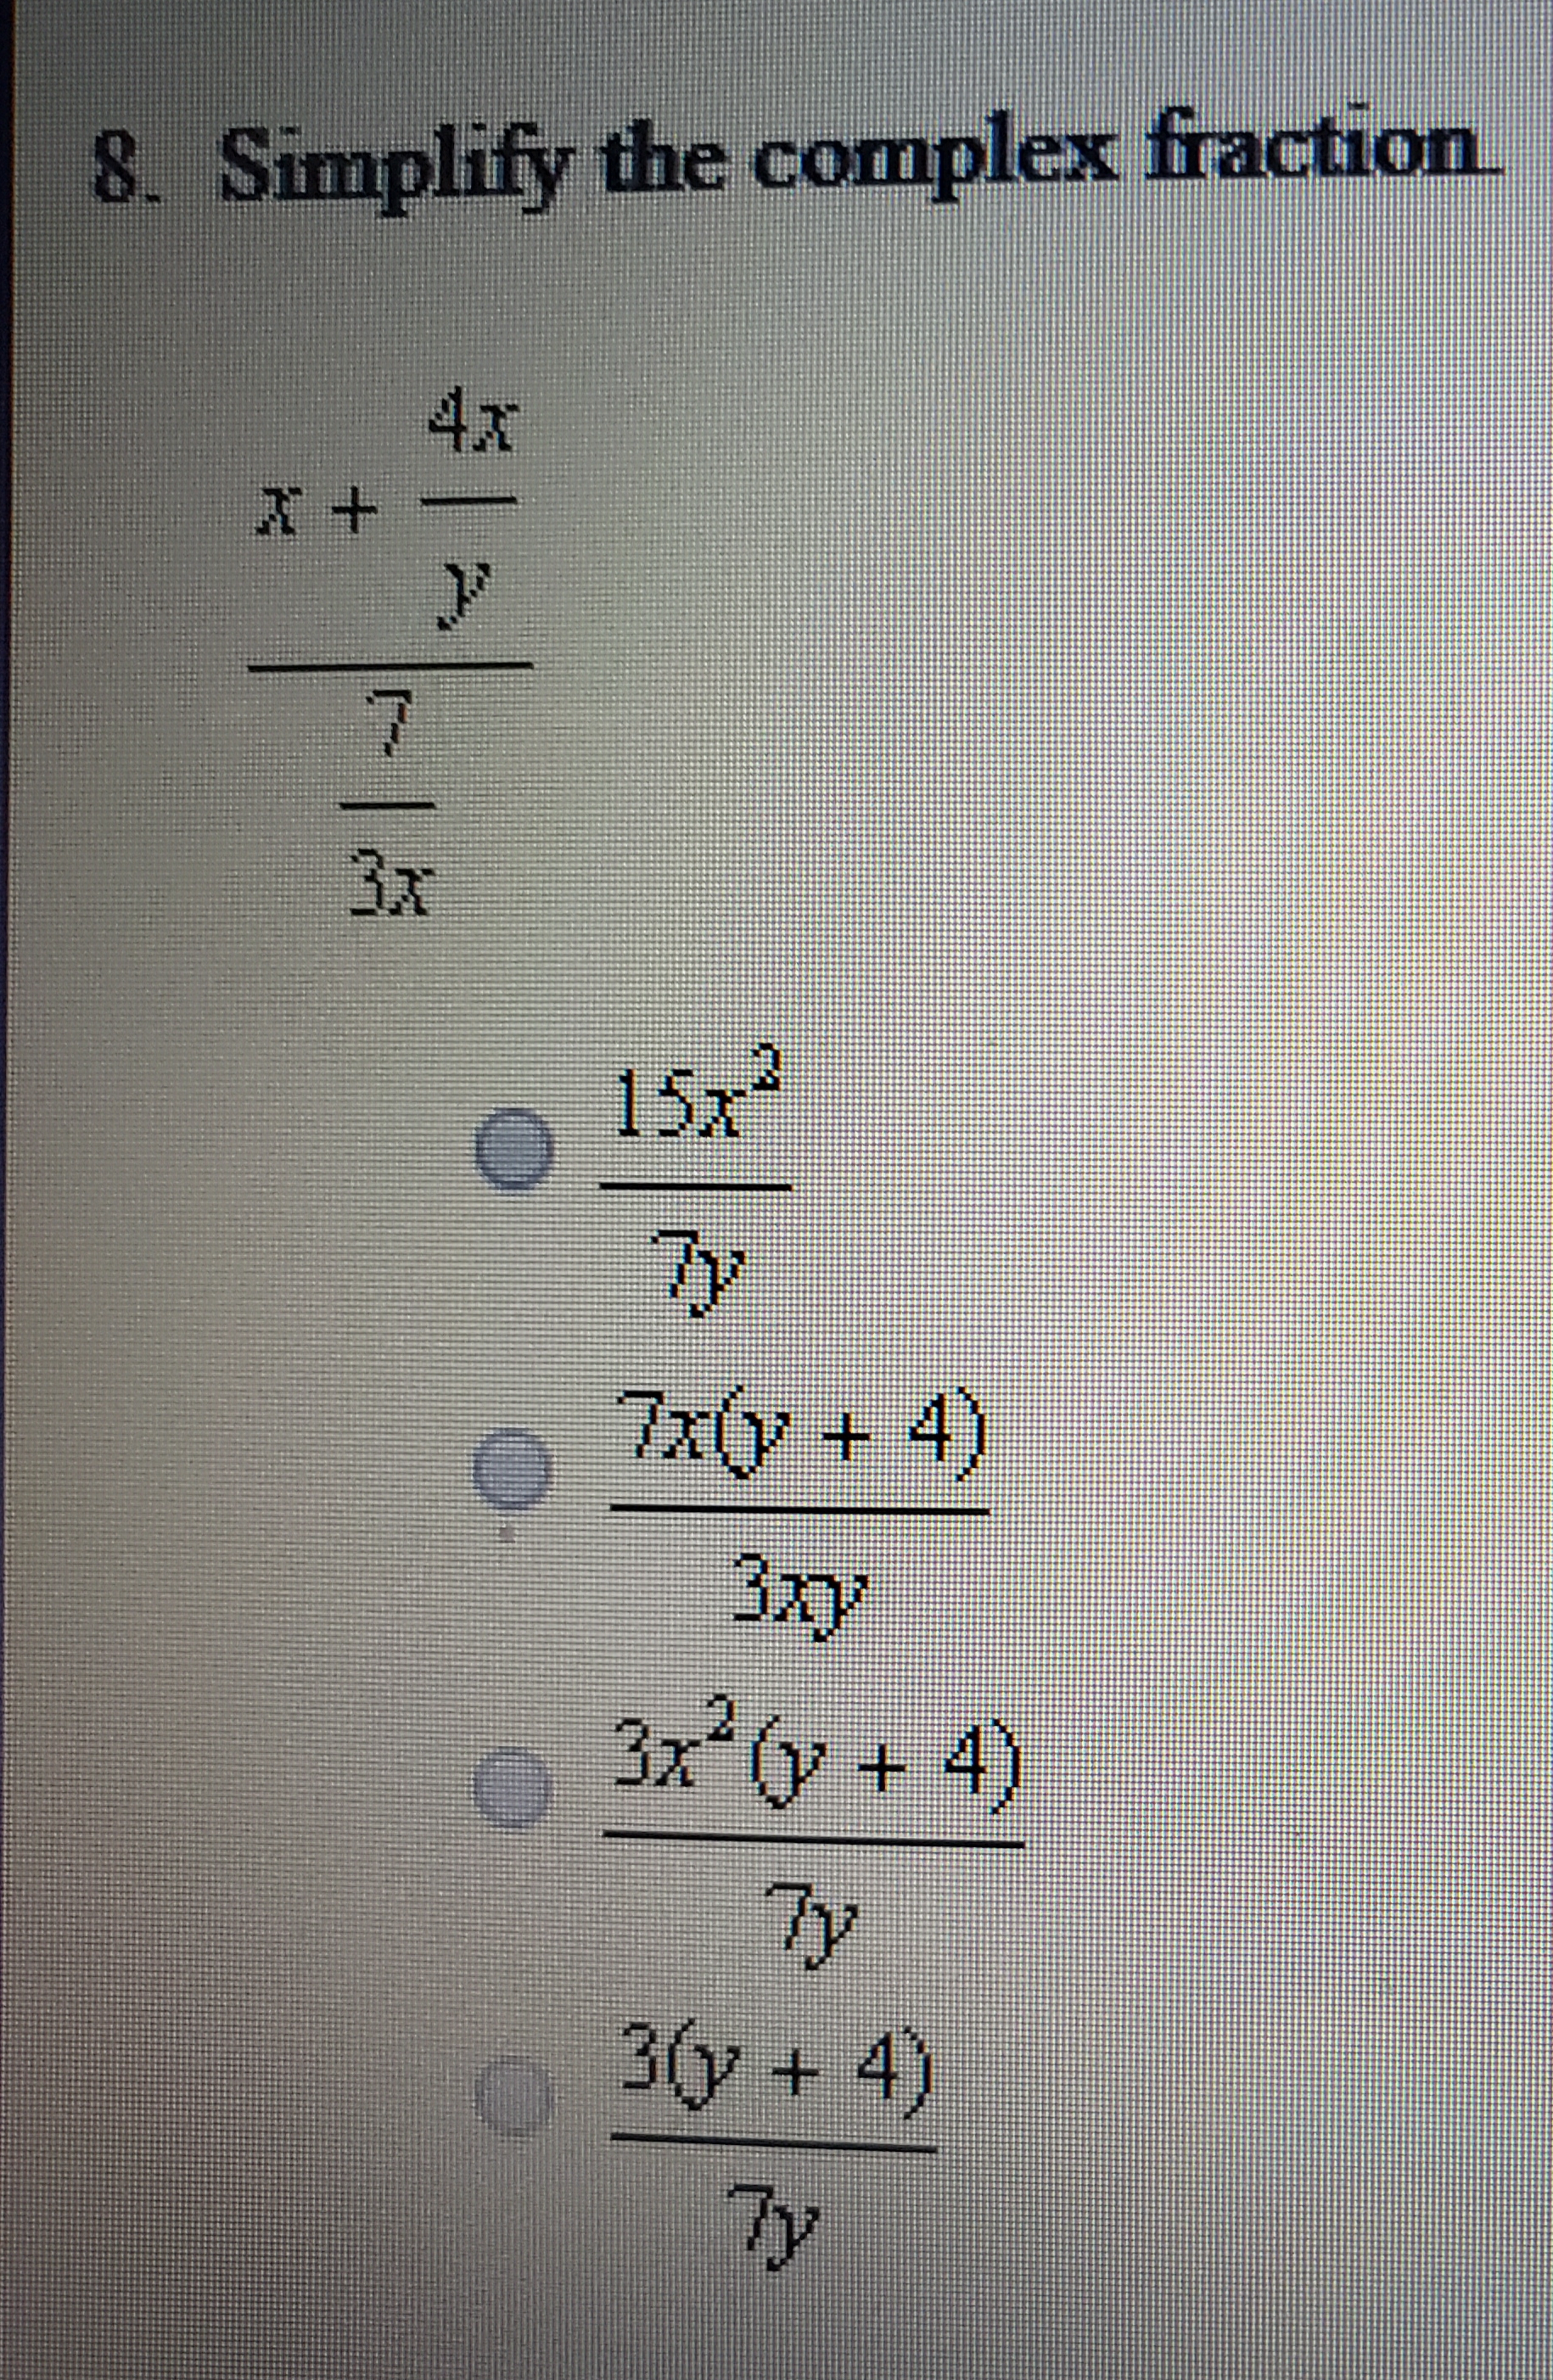 Simplify the complex fraction
